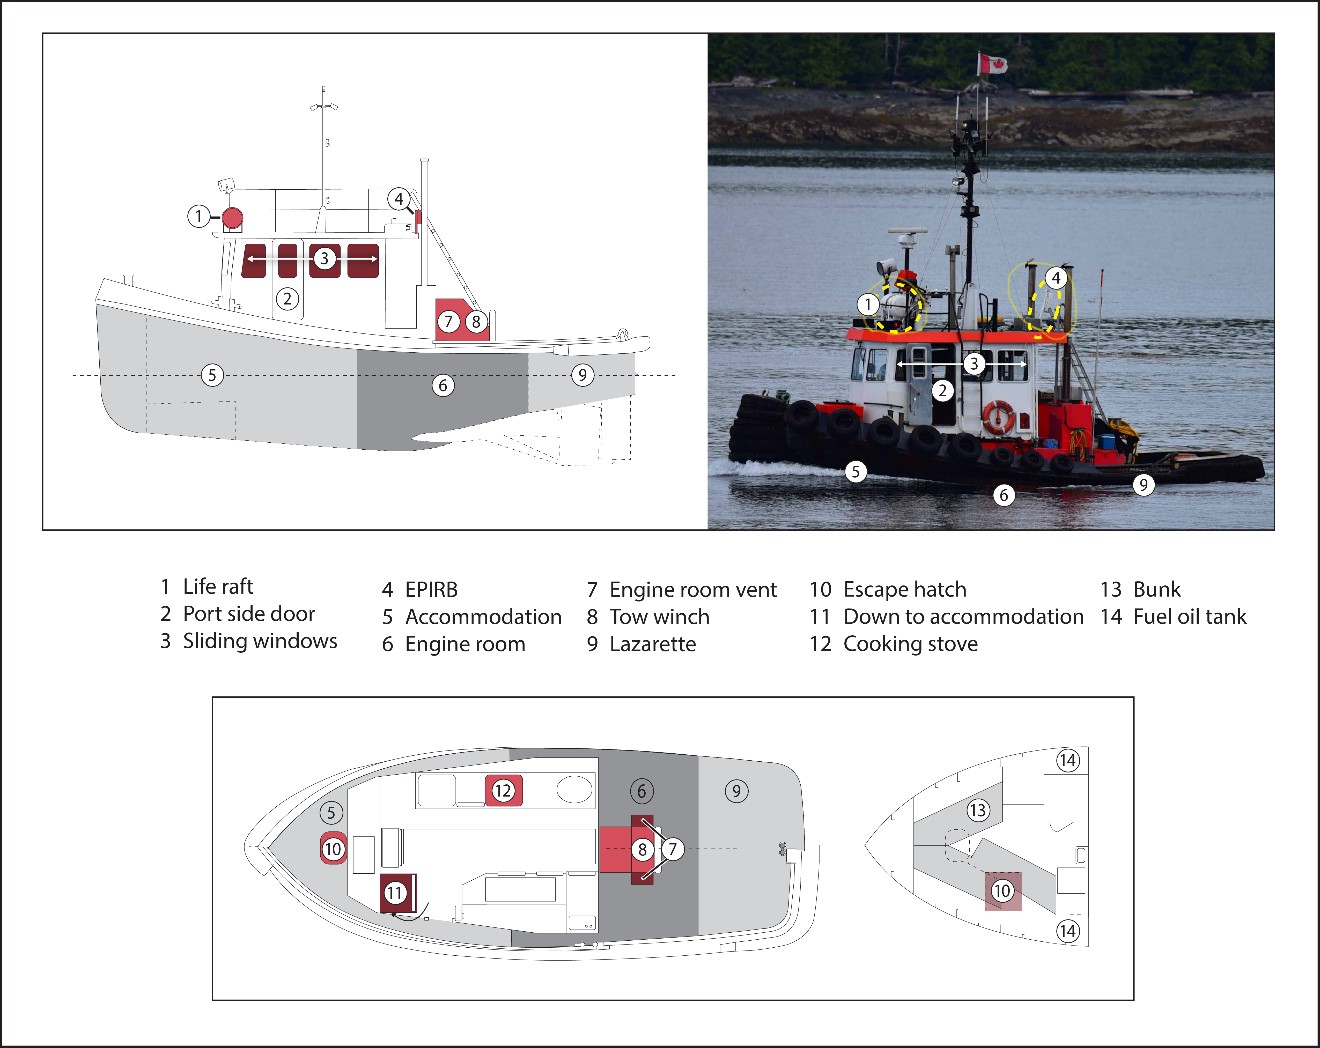 Photo and diagrams (profile and overhead views) of the Ingenika (Source of photo: Third party, with TSB annotations. Source of diagrams: TSB)